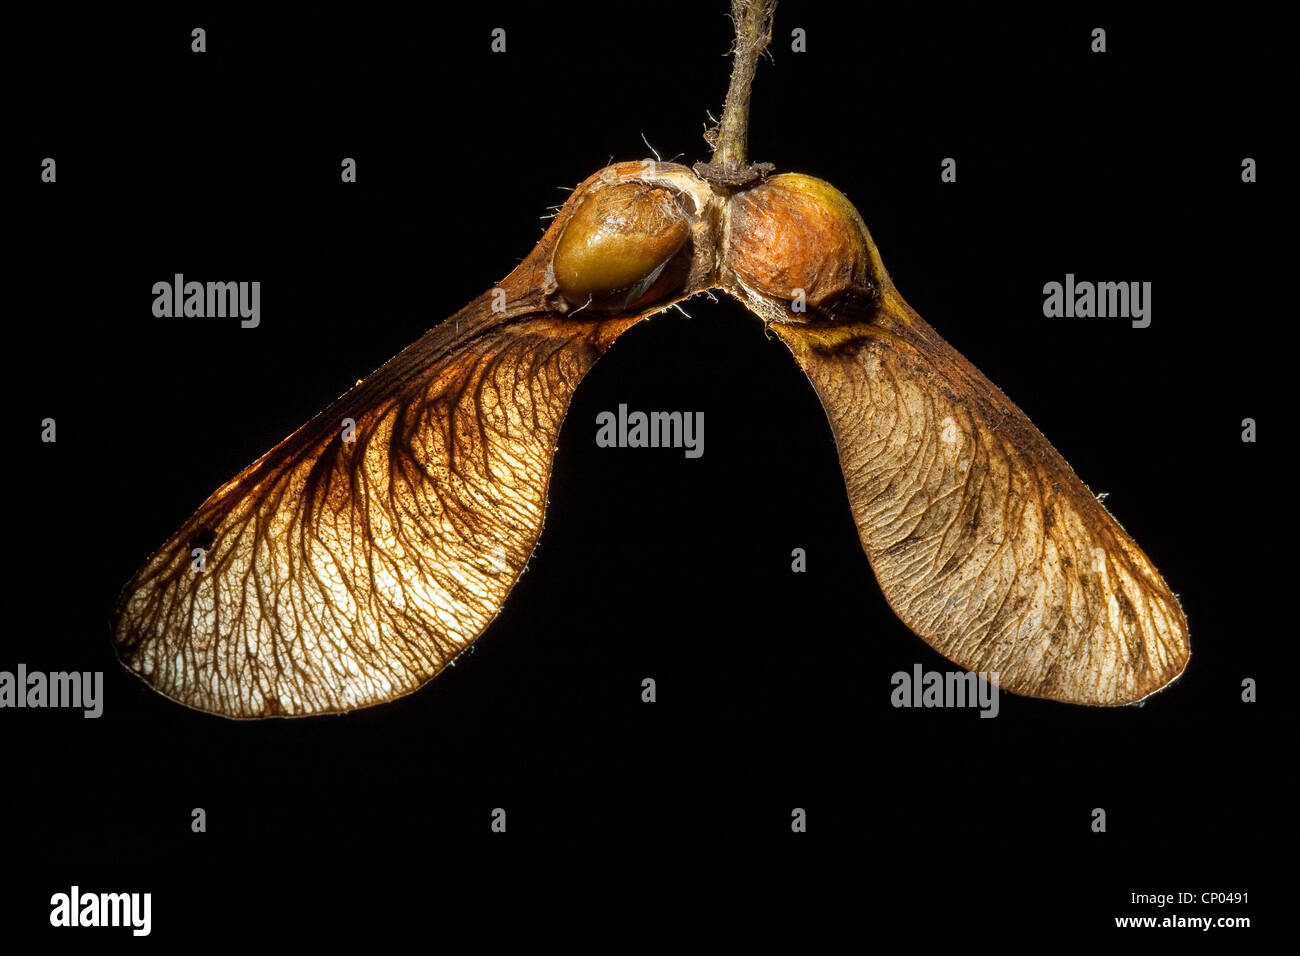 sycamore maple, great maple (Acer pseudoplatanus), fruit of a maple tree, opened to have a look on a seed, Germany Stock Photo